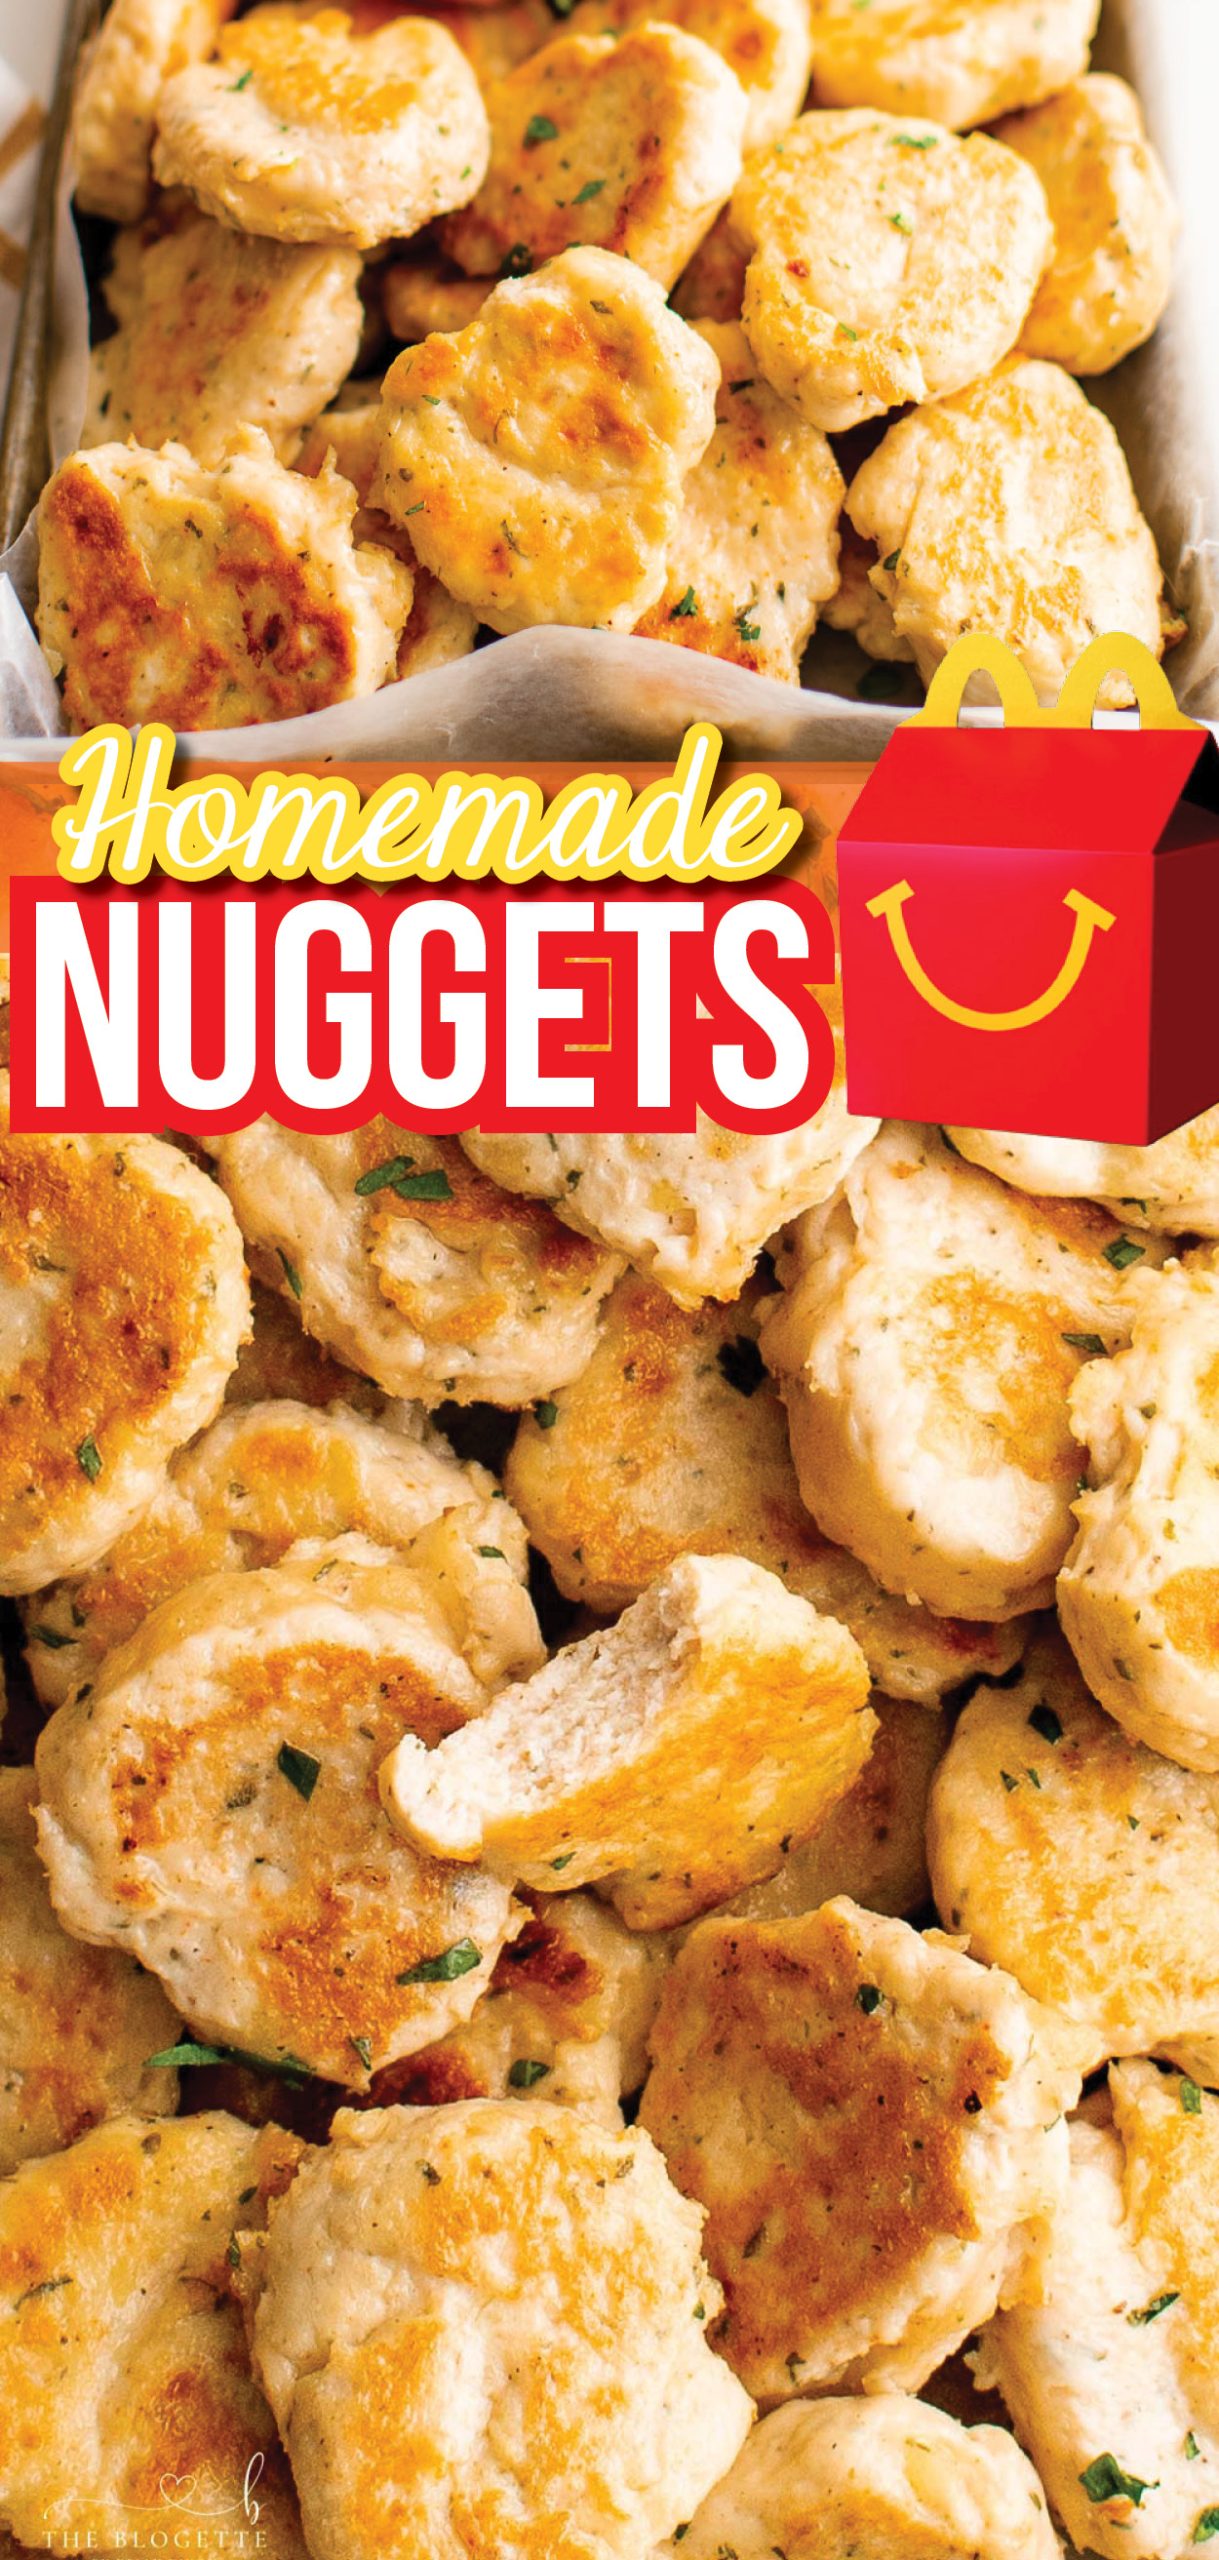 Homemade McNuggets - Skip the drive-through for chicken McNuggets, because these are the BEST chicken nuggets you can make at home!